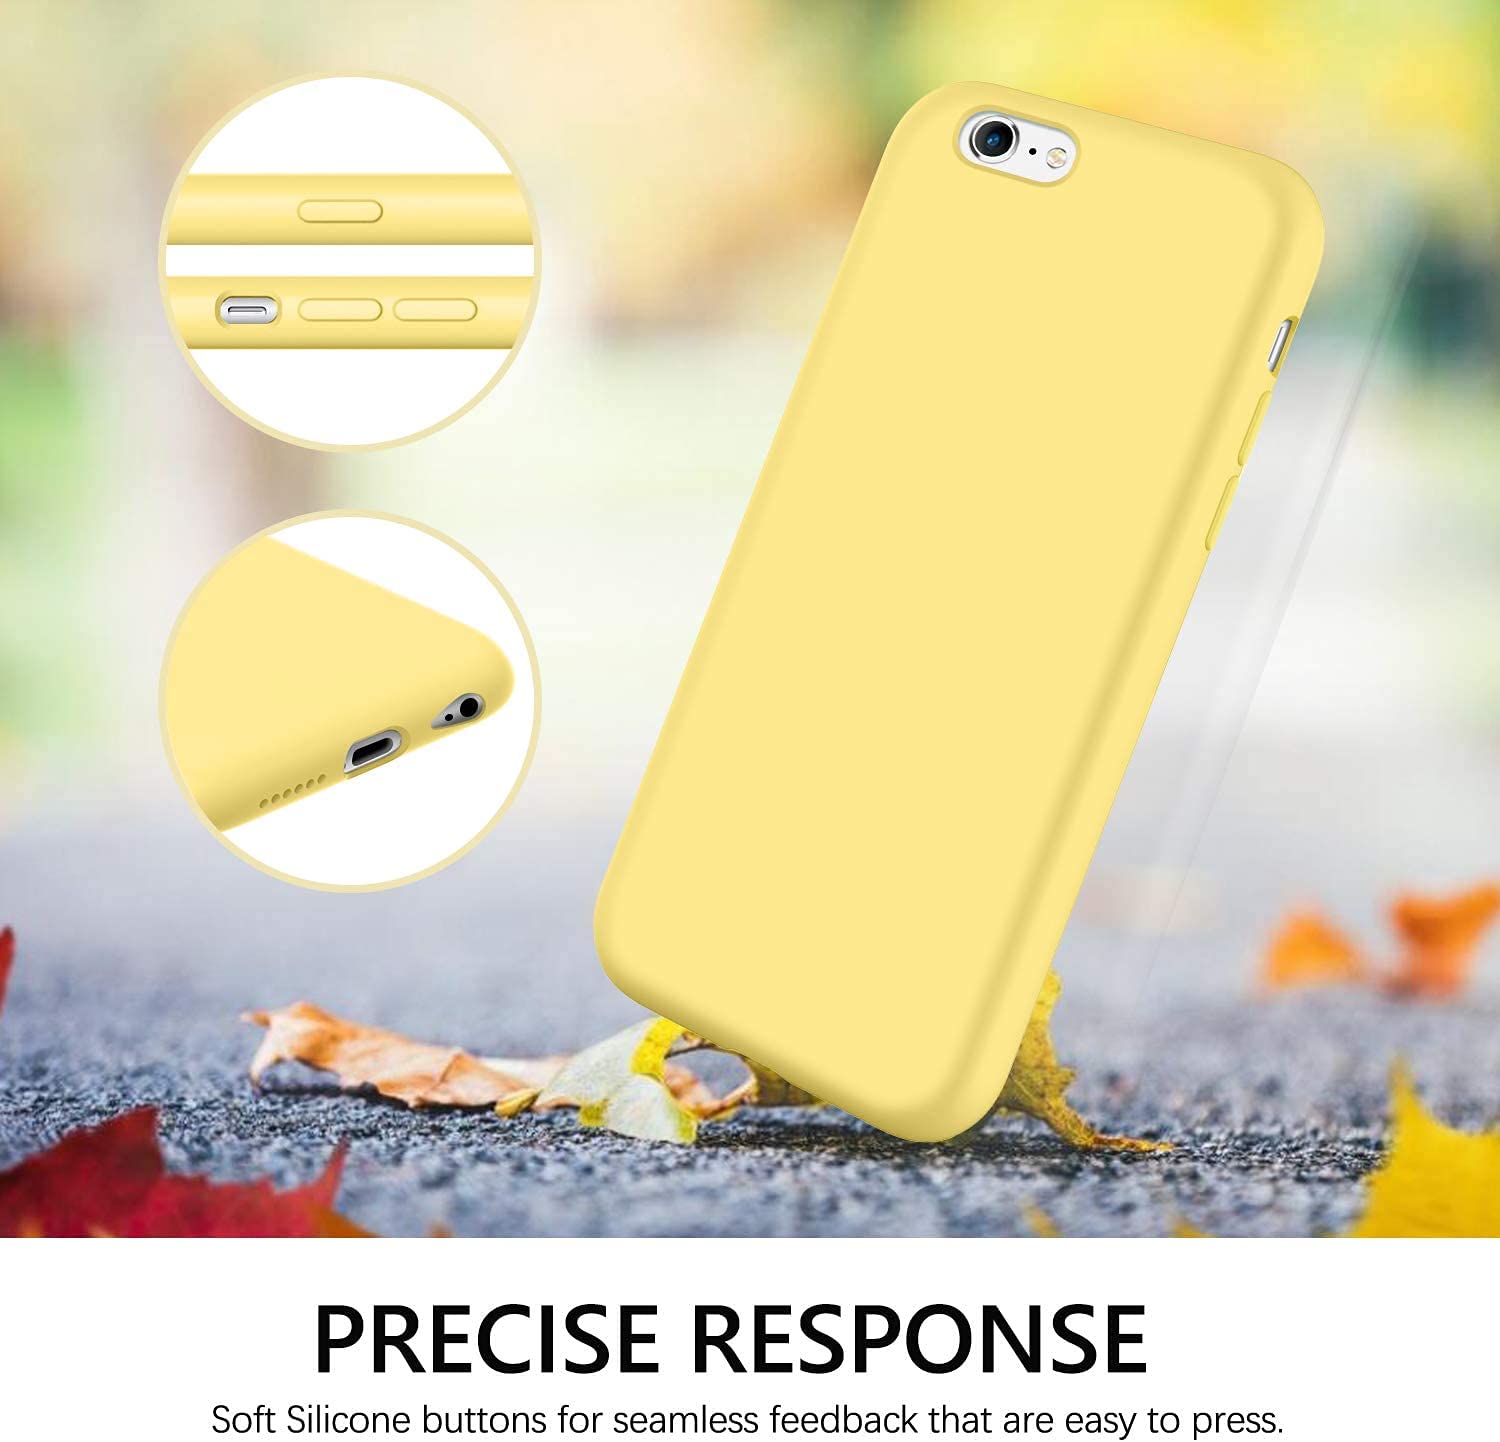 GUAGUA iPhone 6s Case iPhone 6 Case Liquid Silicone Soft Gel Rubber Slim Lightweight Microfiber Lining Cushion Texture Cover Shockproof Protective Anti-Scratched Phone Cases for iPhone 6/6S Yellow